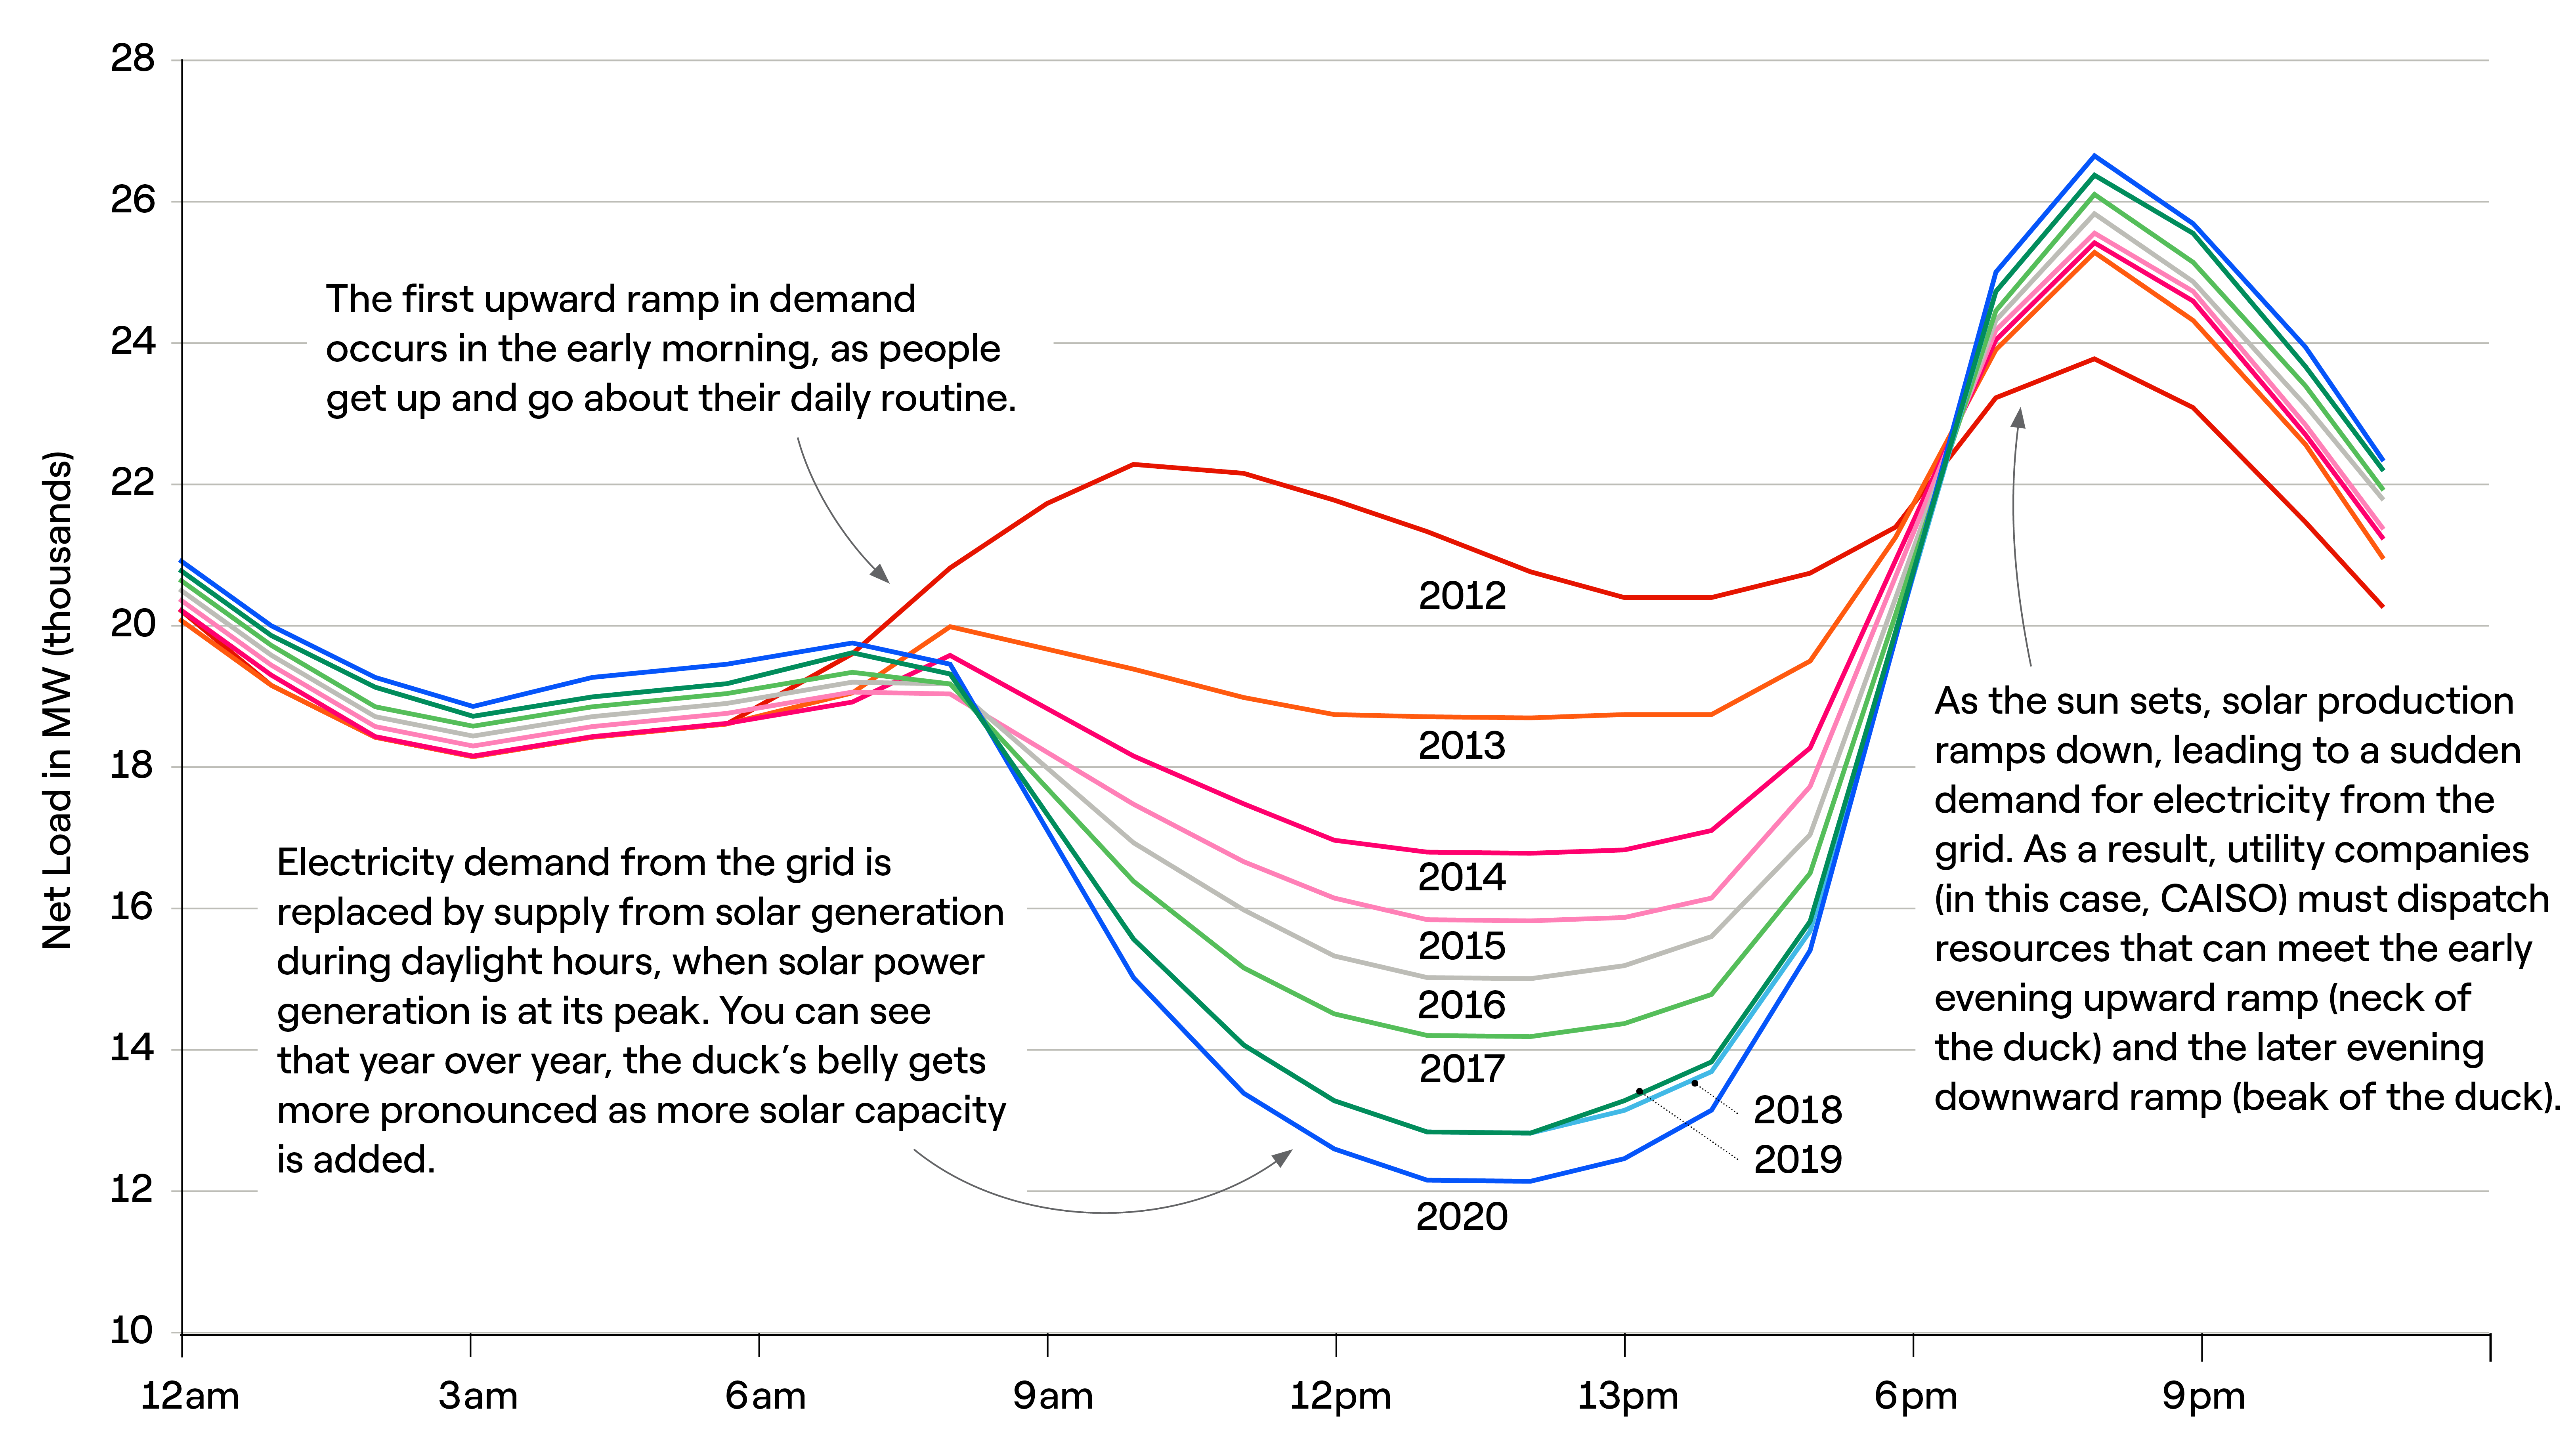 Graph showing net load in MW throughout various times of day and different years